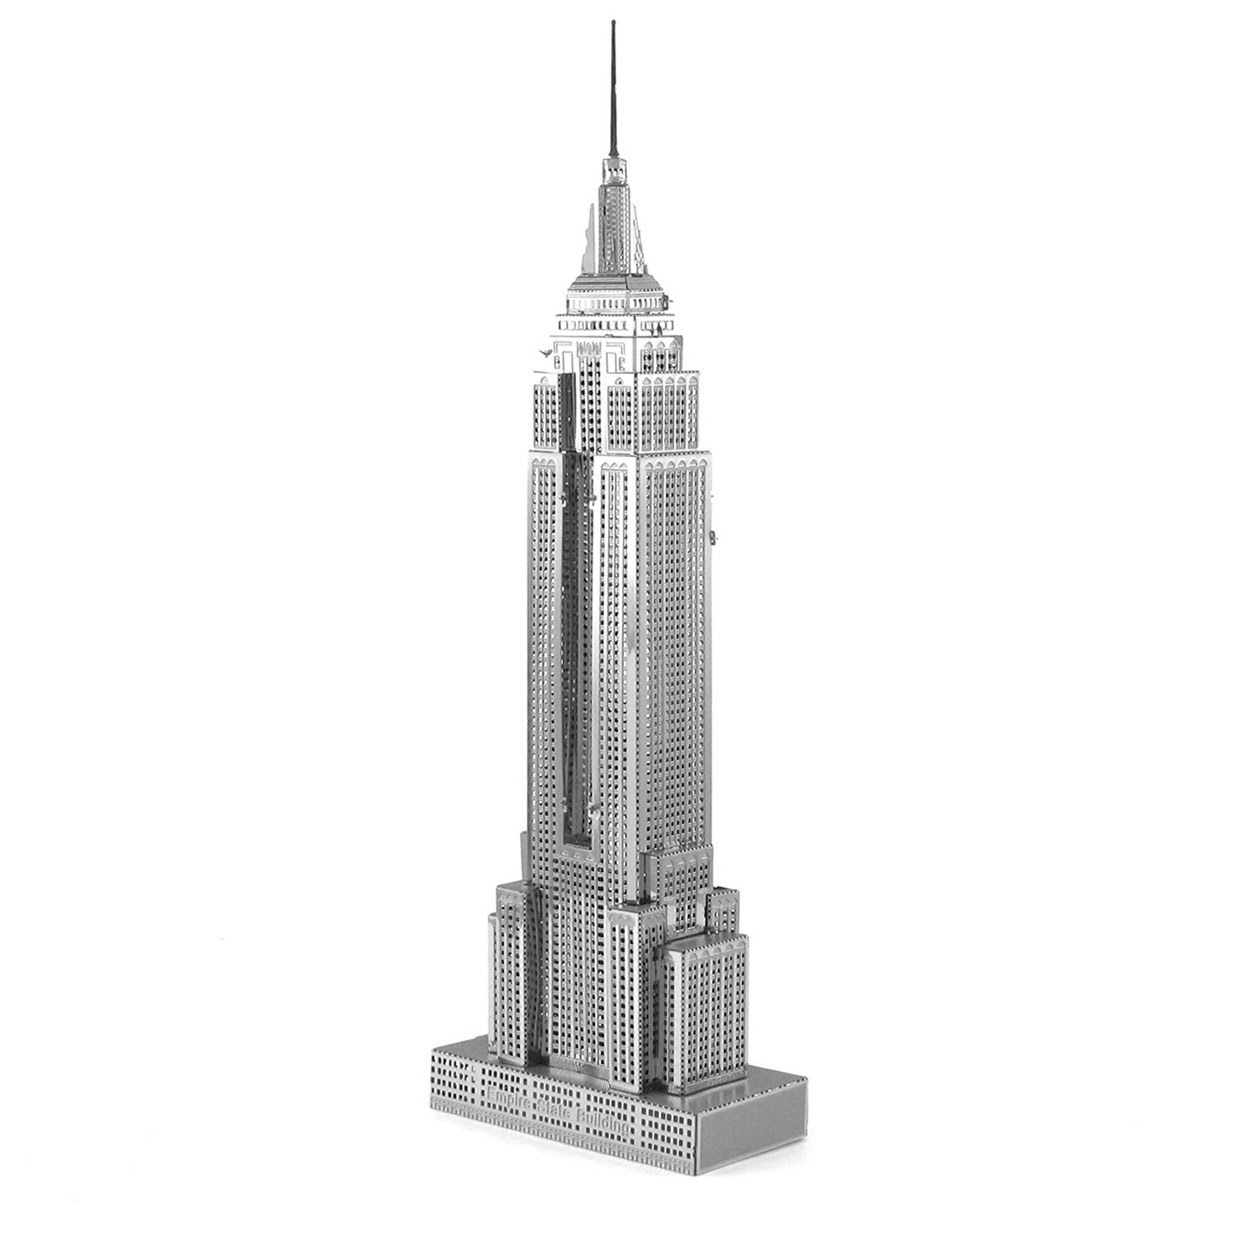 Metal Earth - ICONX - Empire State Building